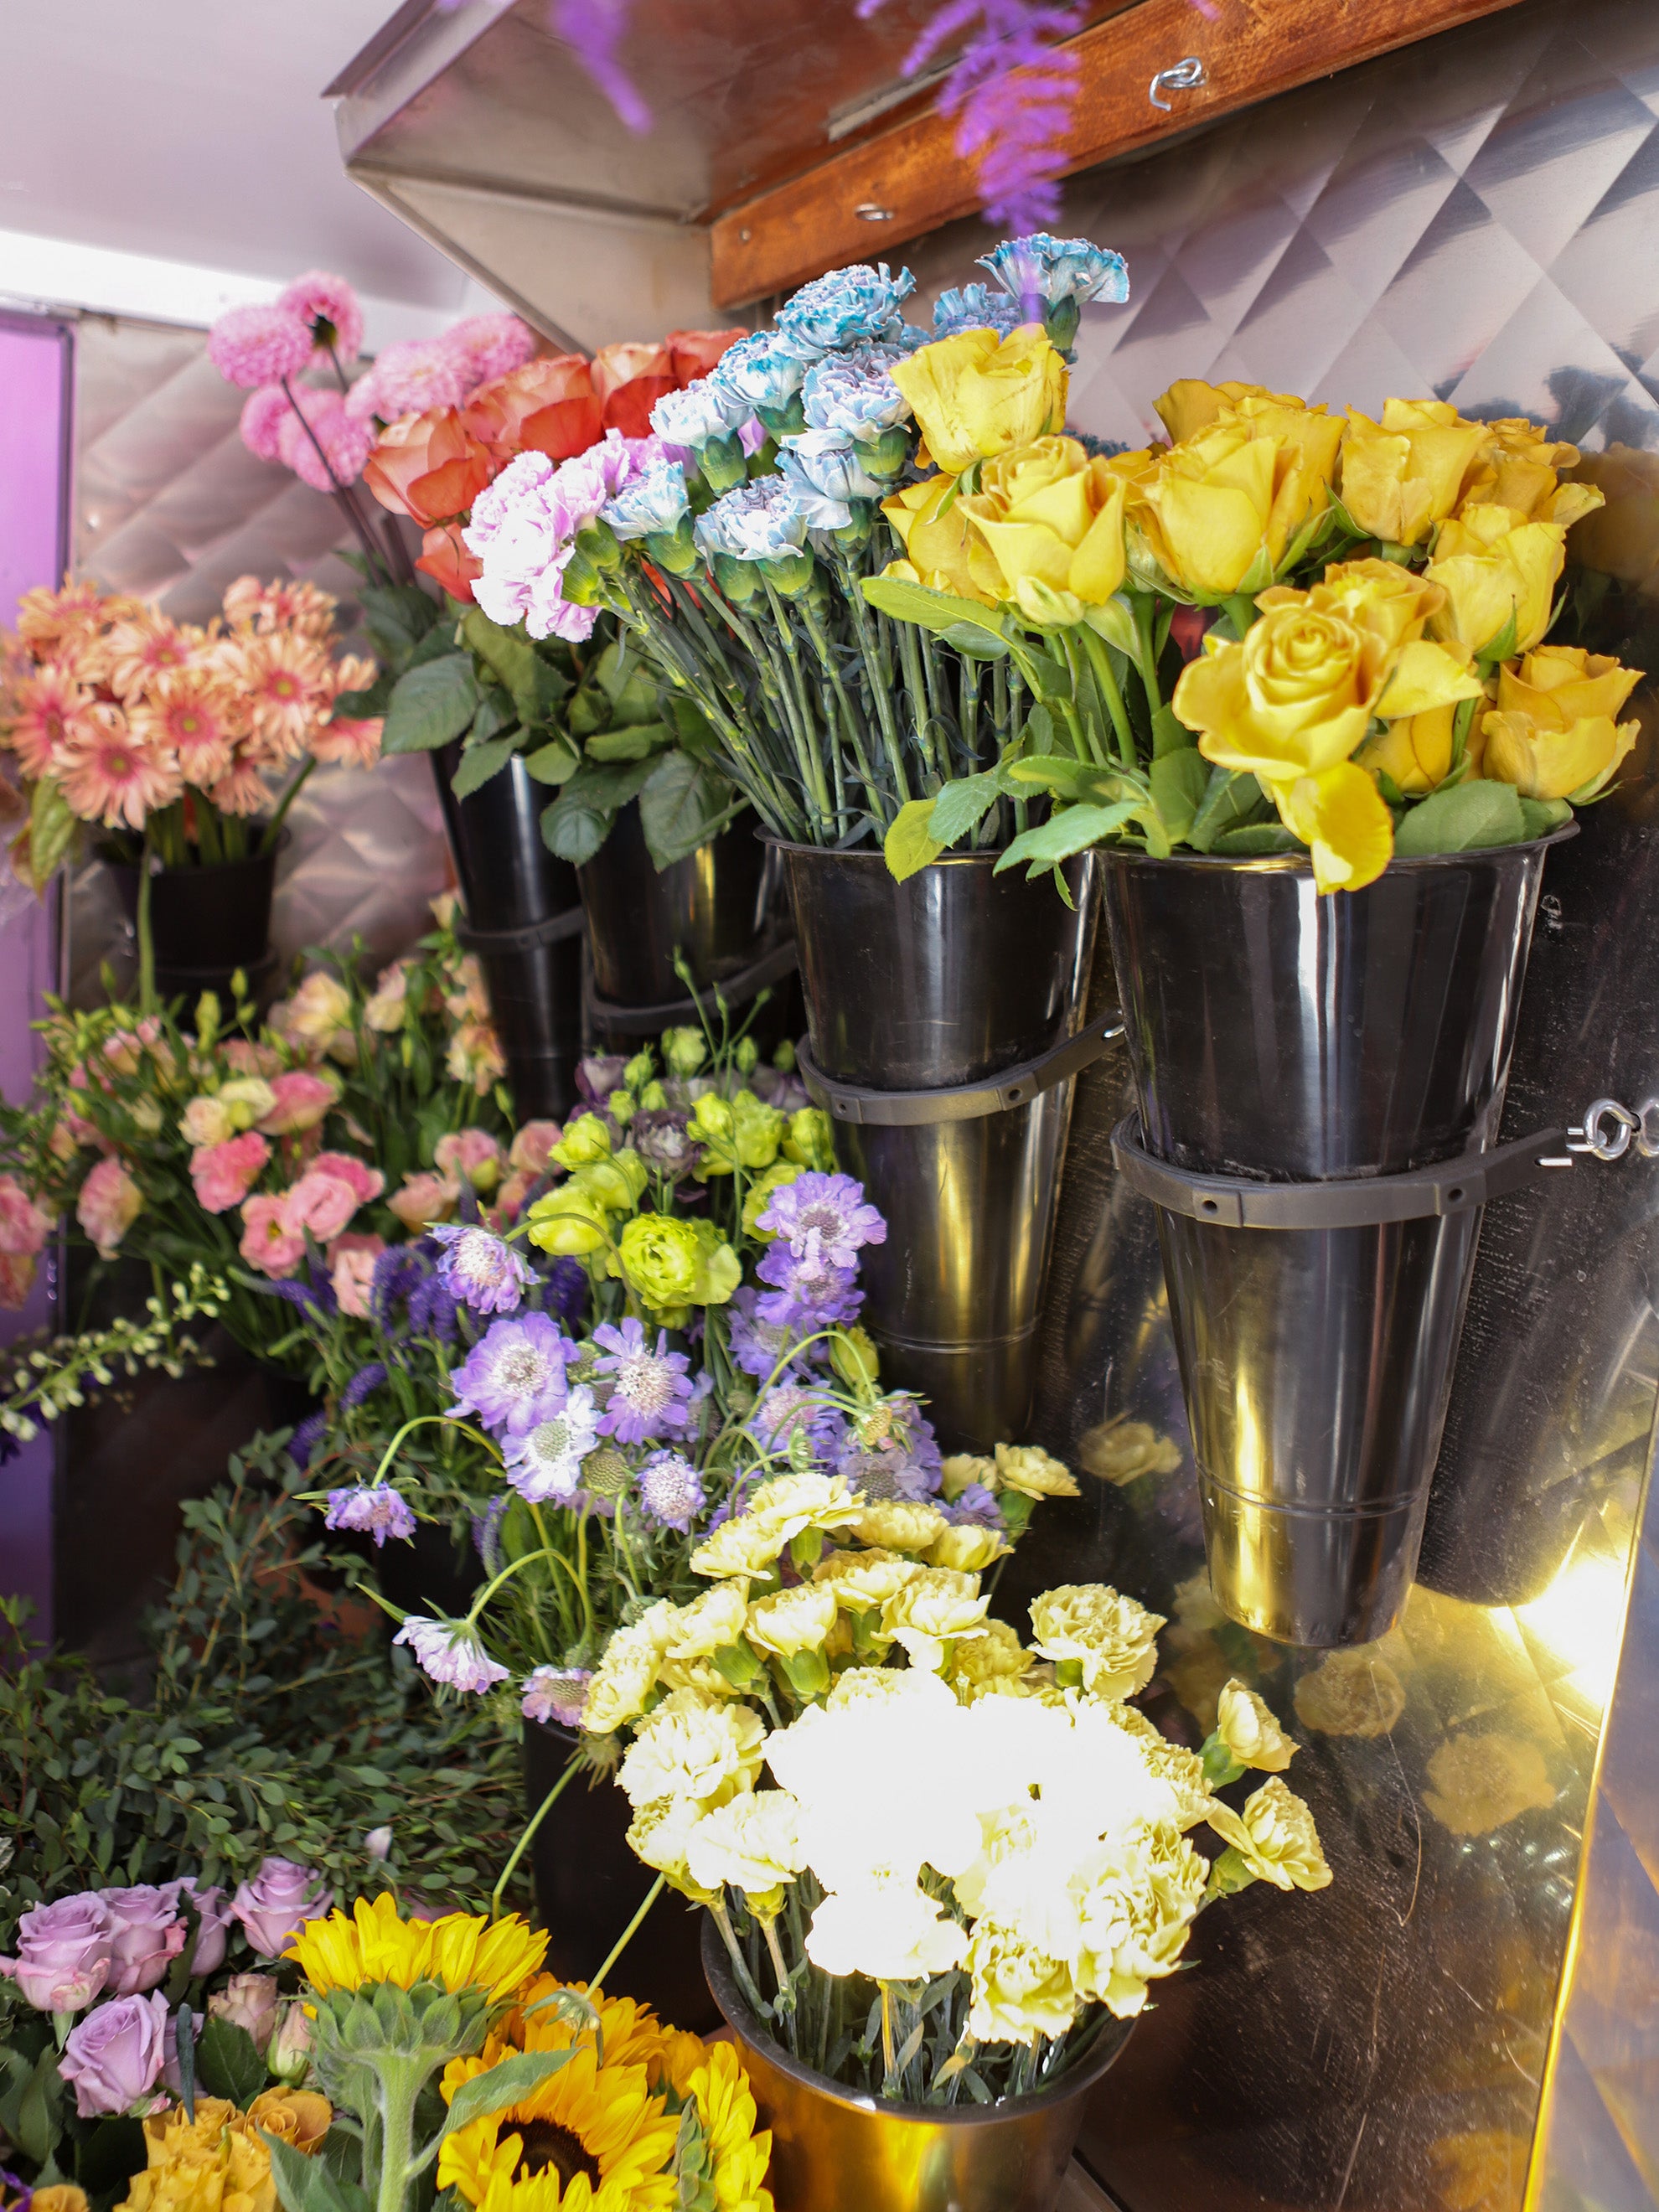 The inside of the truck that holds a variety of flowers in black holders